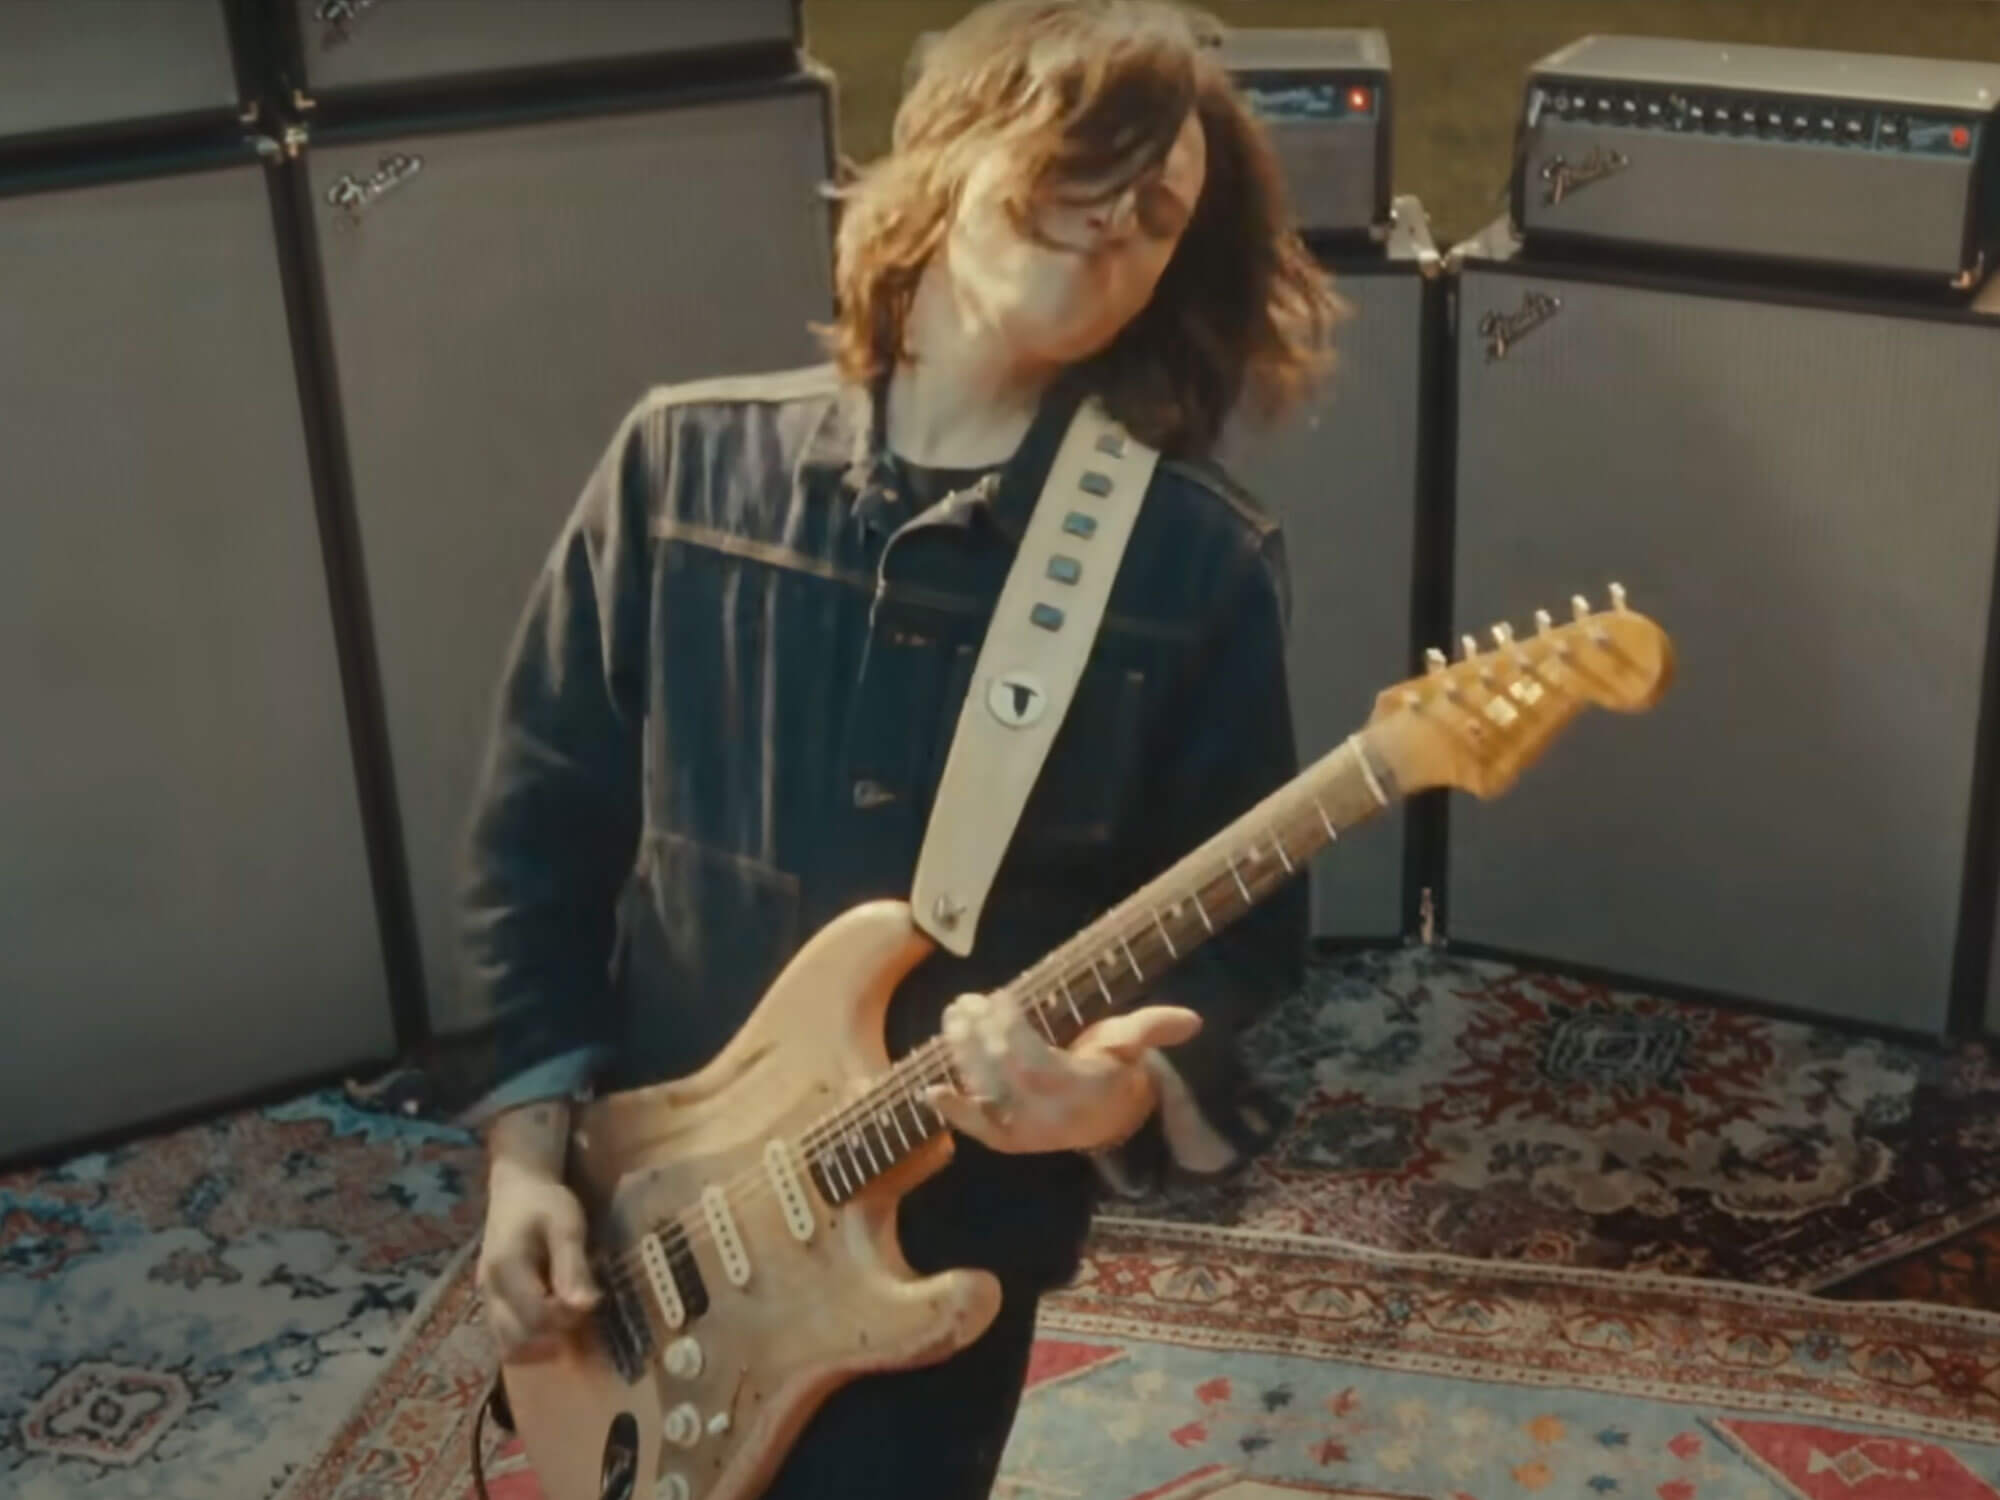 Fender Forever Ahead Of Its Time video